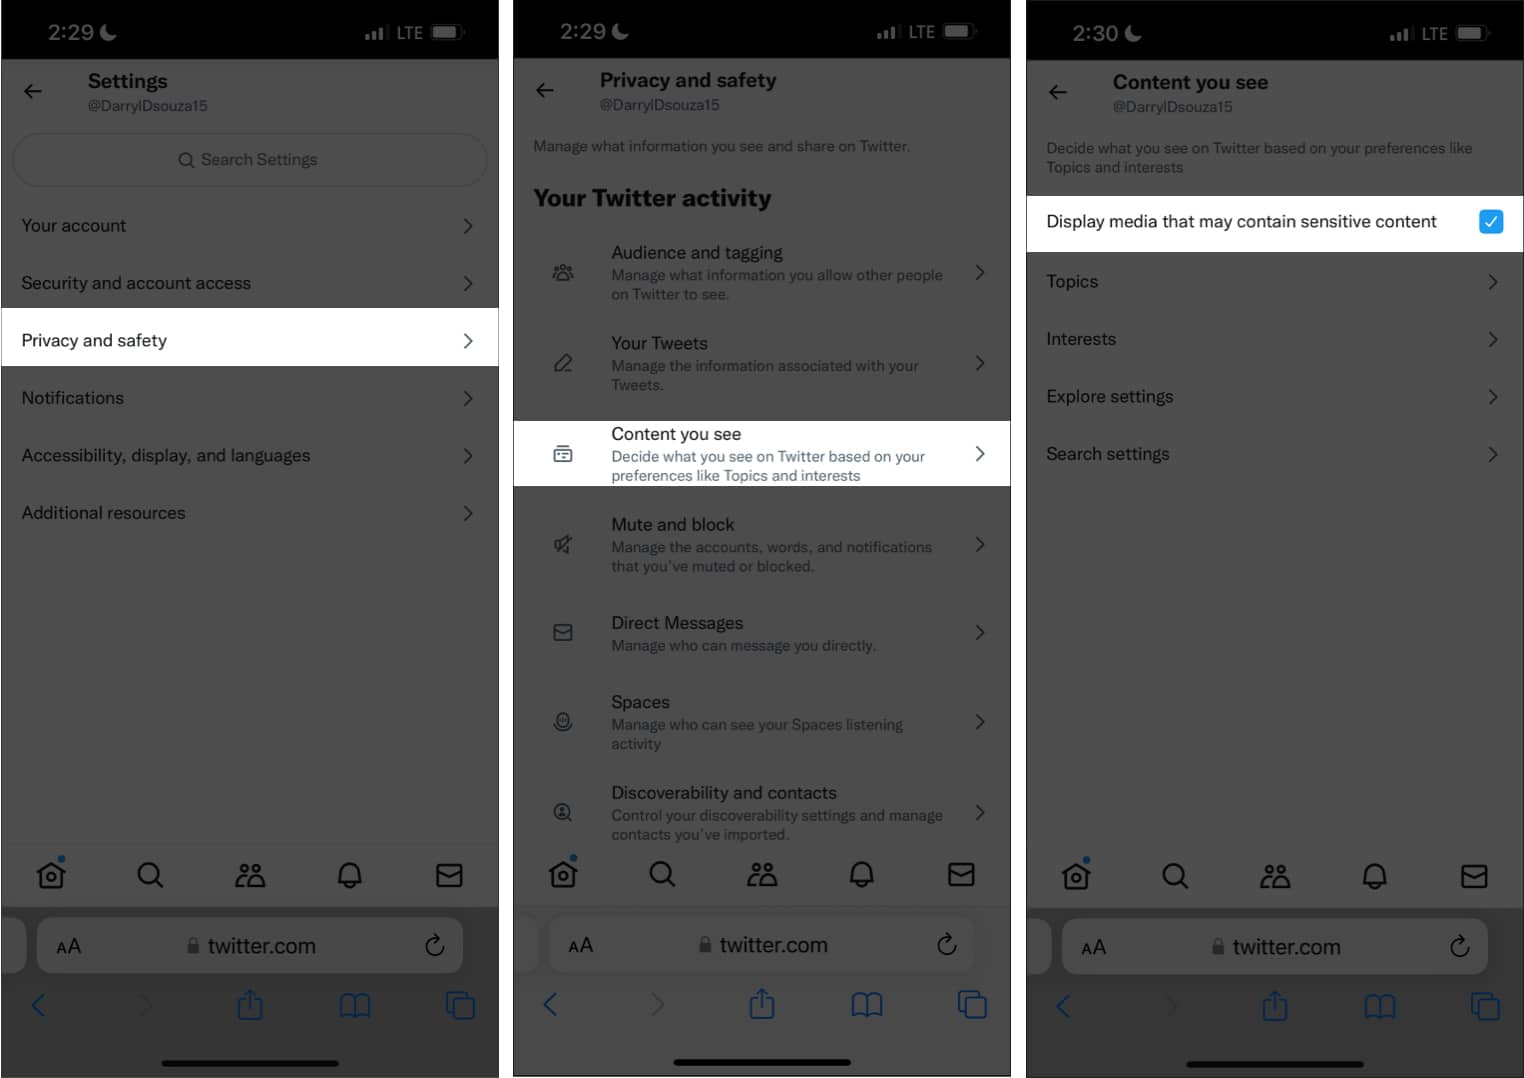 How to See Sensitive Content on Twitter on iPhone